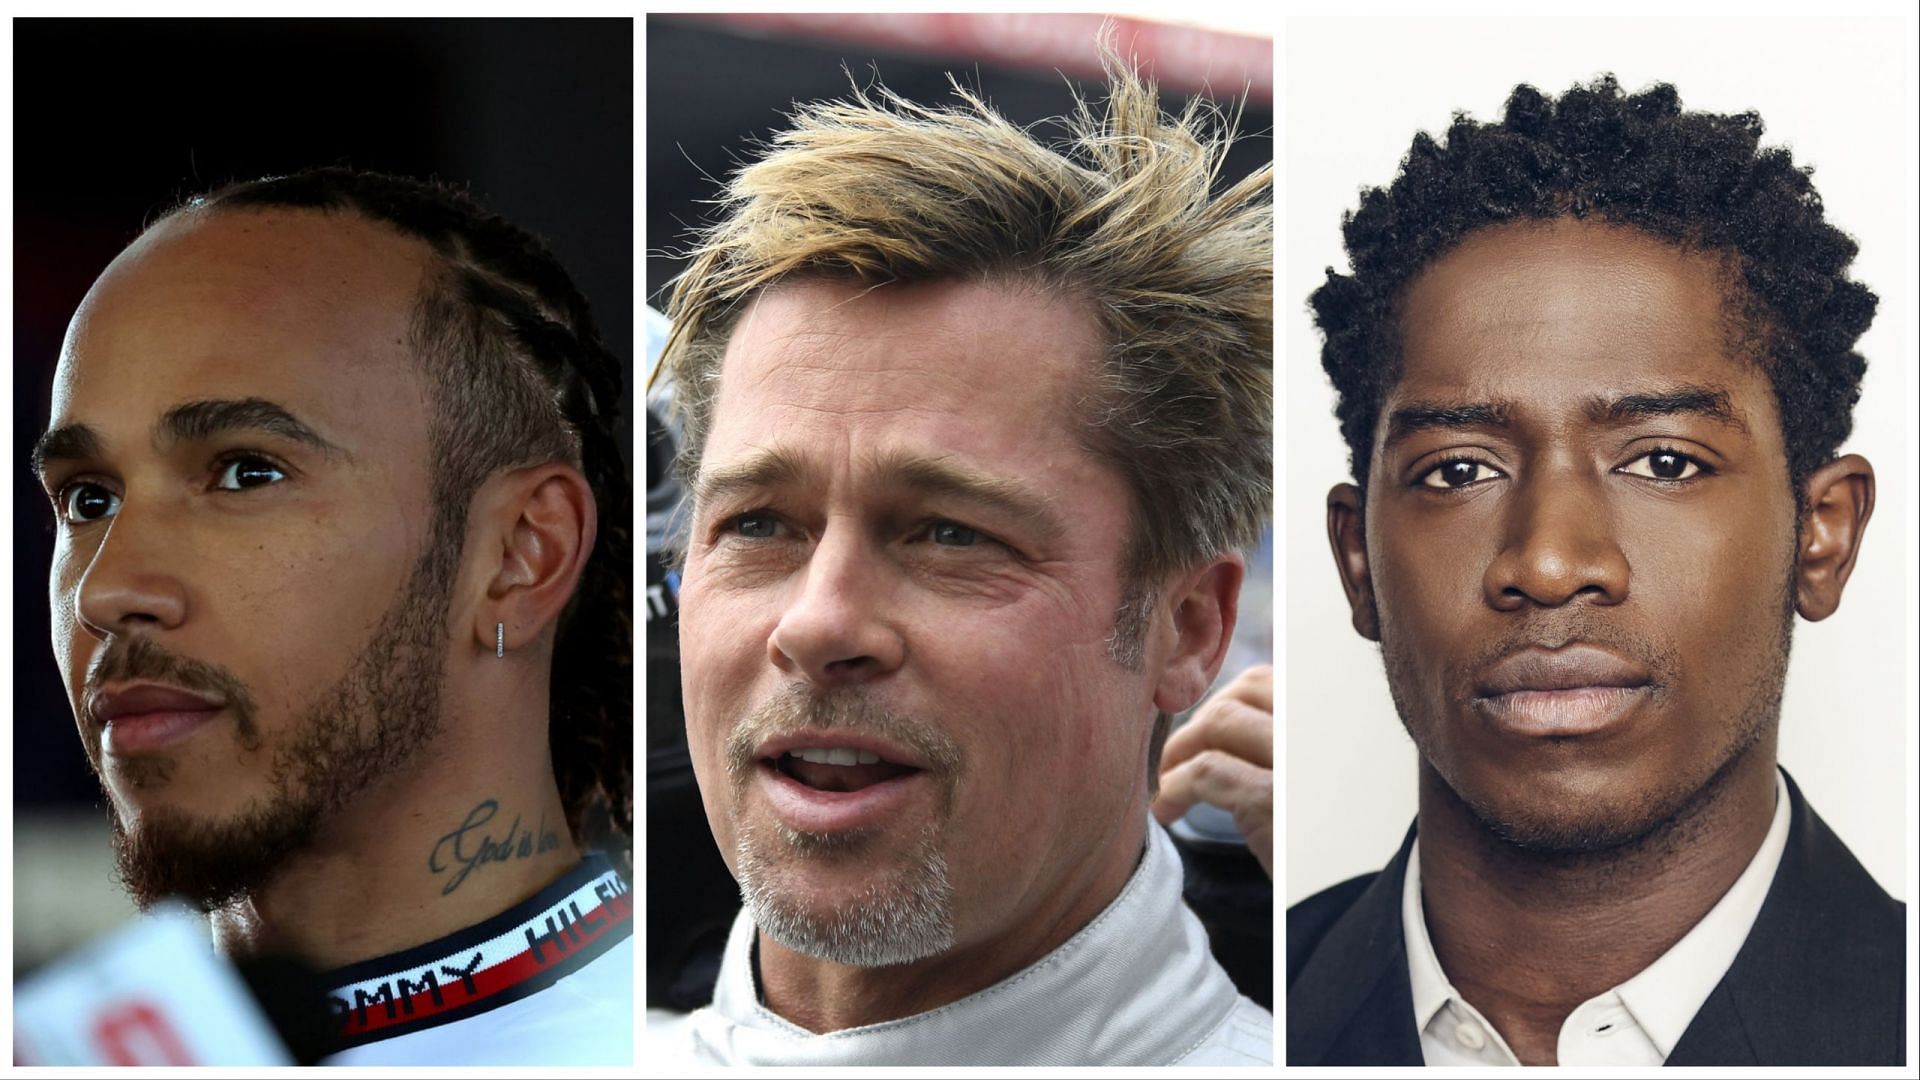 Lewis Hamilton&rsquo;s F1 movie sign Snowfall actor to star with Brad Pitt